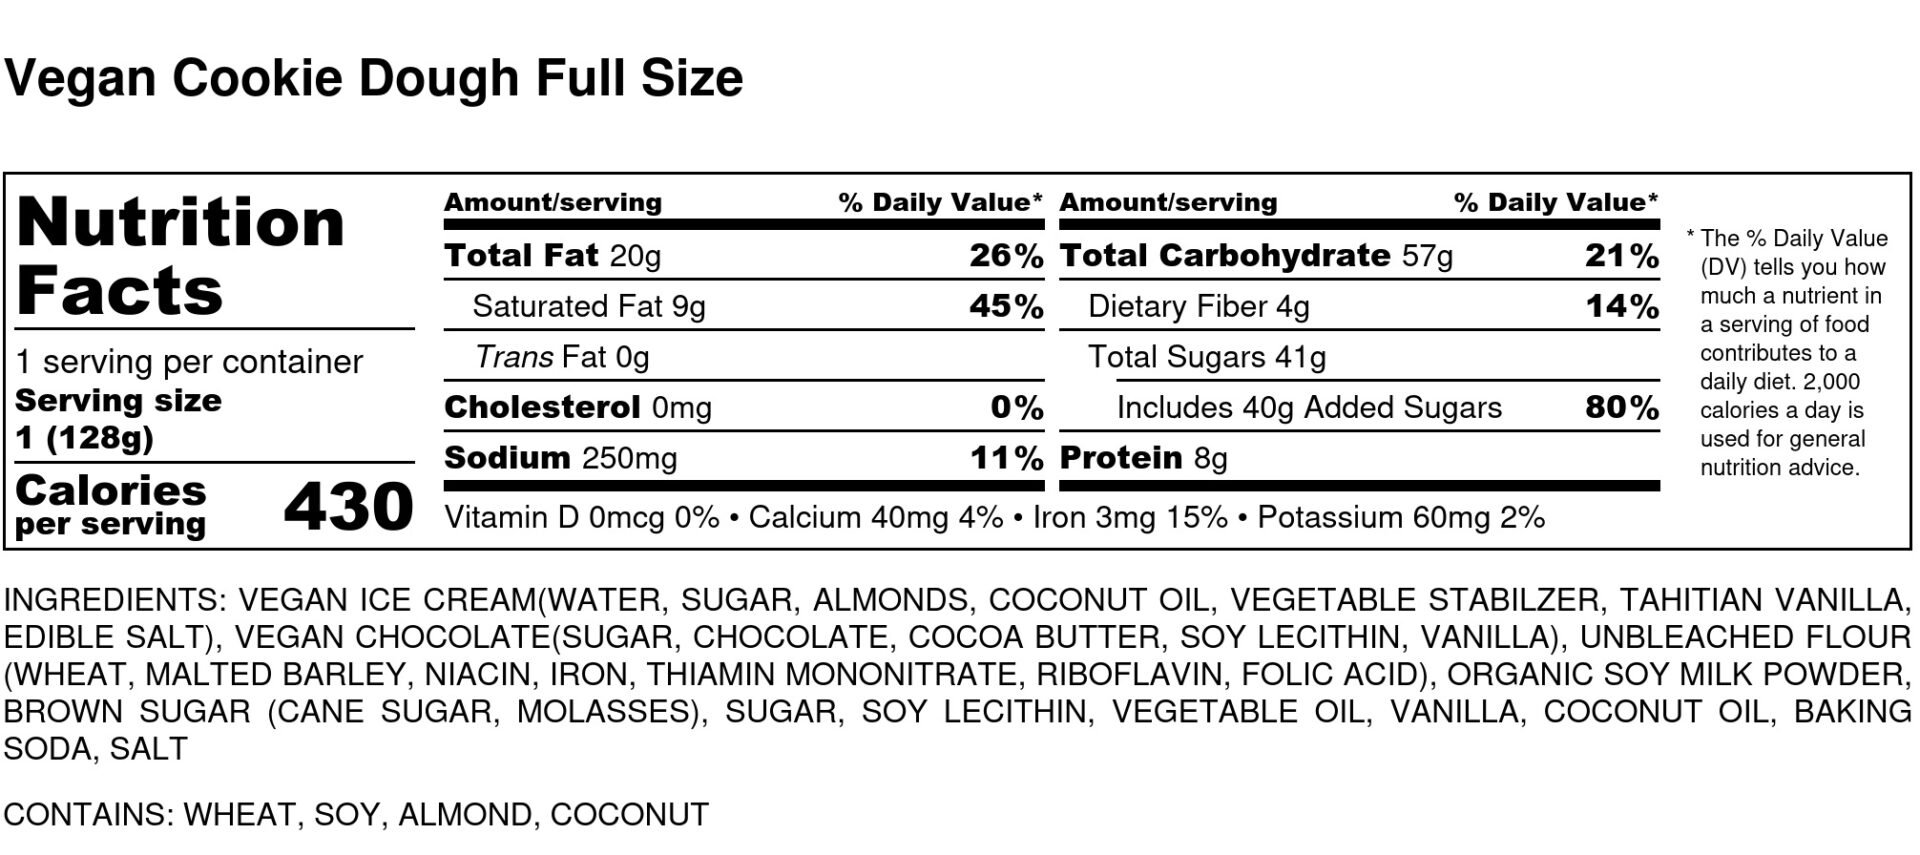 Vegan Cookie Dough Full Size Nutrition Label scaled